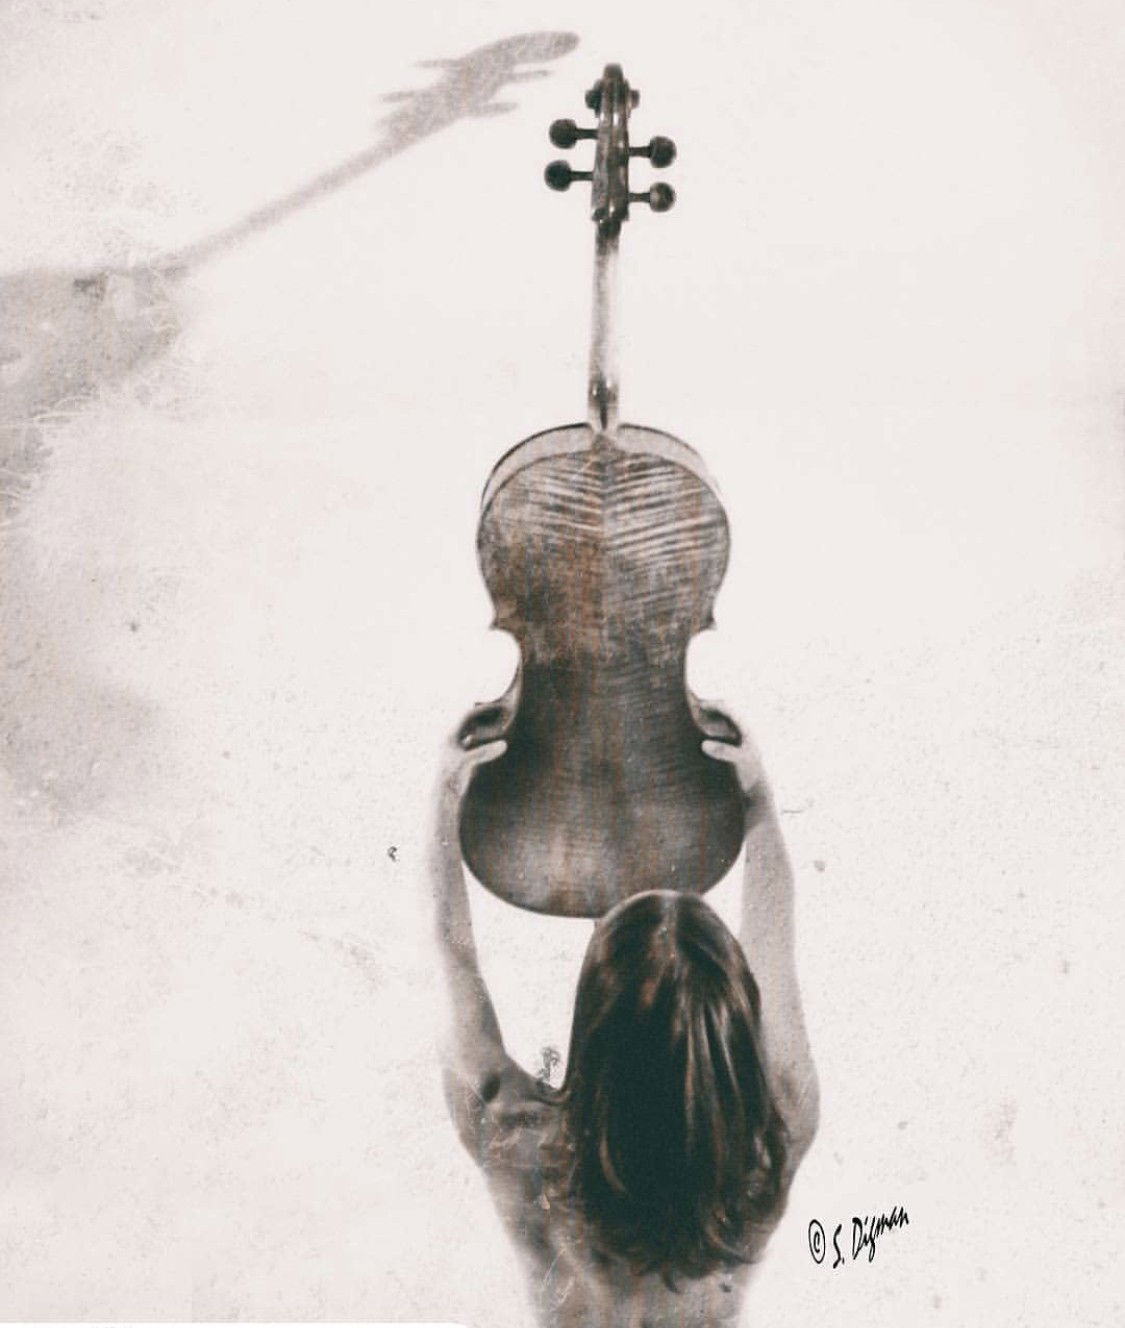 Photo by PolyAnnieStudios with the username @PolyAnnieStudios, who is a star user,  September 29, 2019 at 5:54 AM. The post is about the topic erotic art and the text says 'The cello is my favorite instrument! the one that speaks to my soul the most. 
photo from earlier years! 
https://www.patreon.com/polyannie'